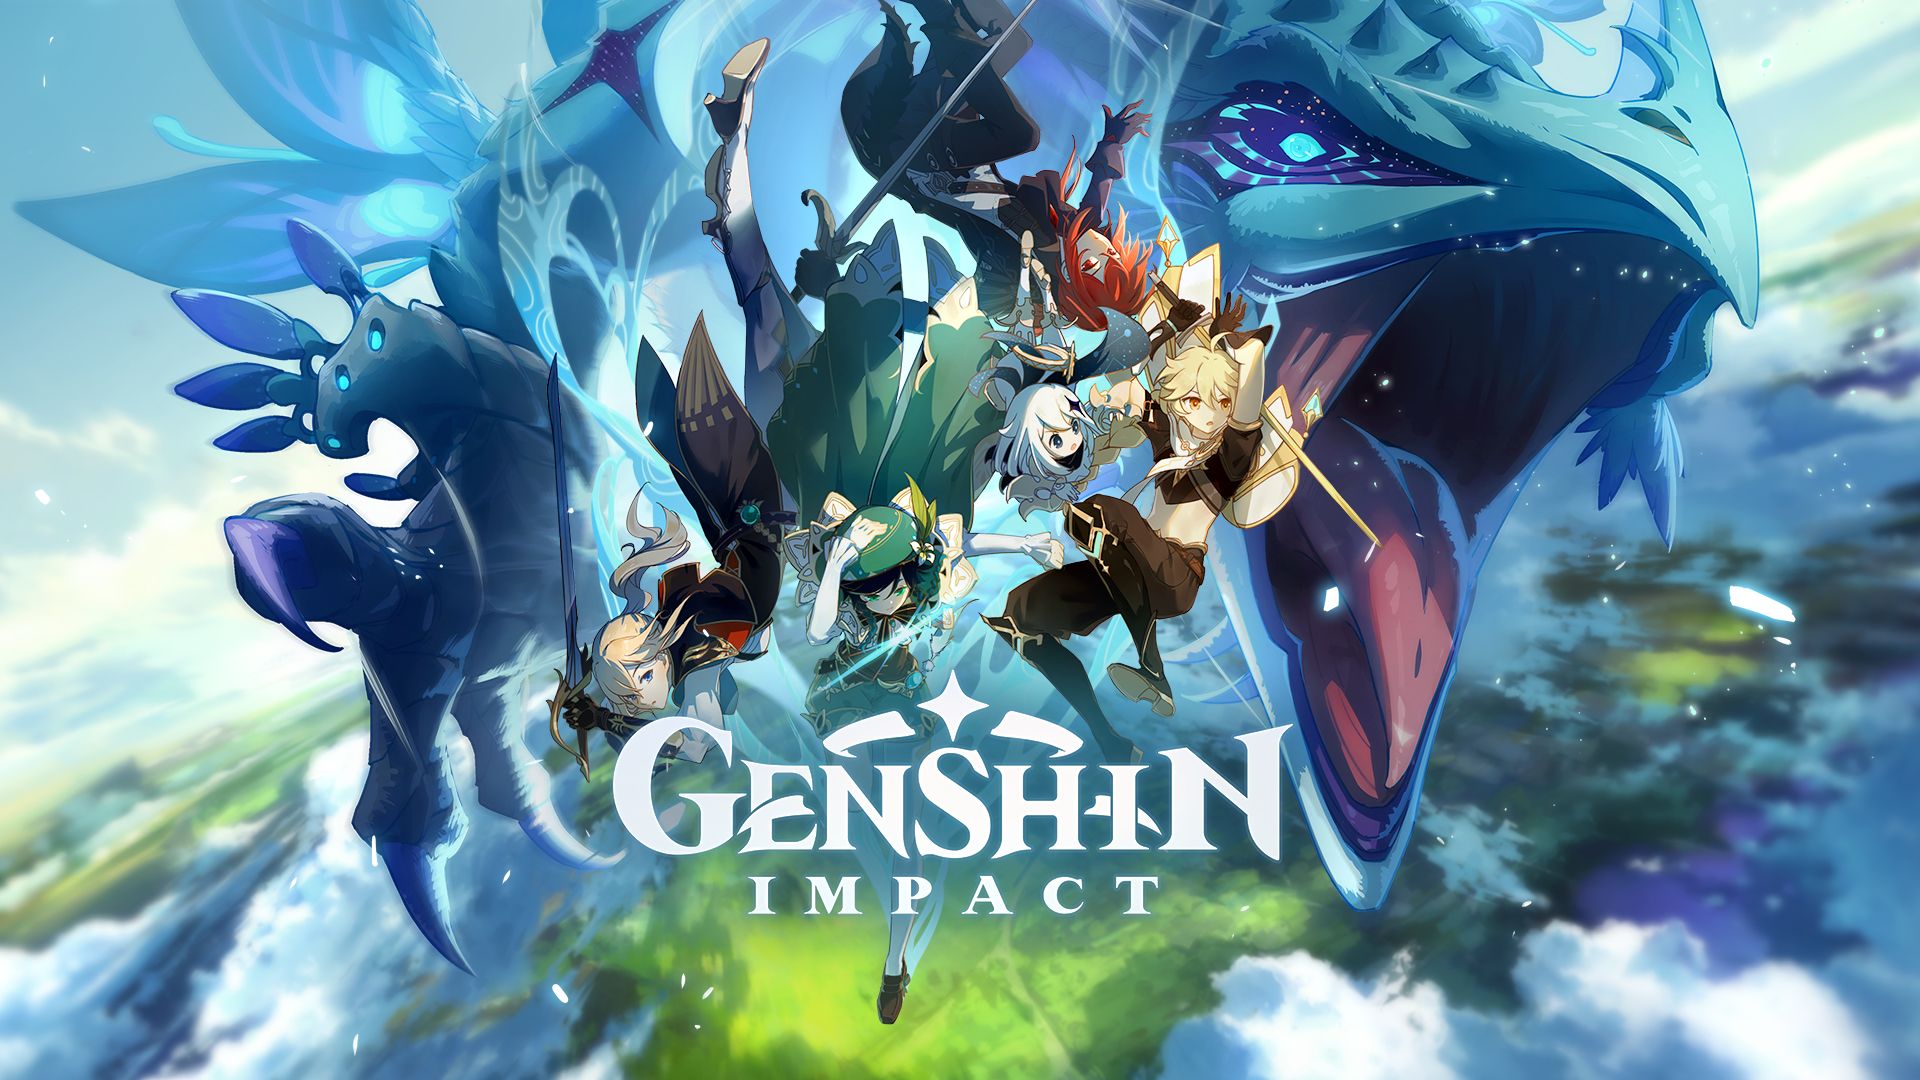 Genshin Impact Is The New Benchmark For Free To Play Mobile Games, Out Now